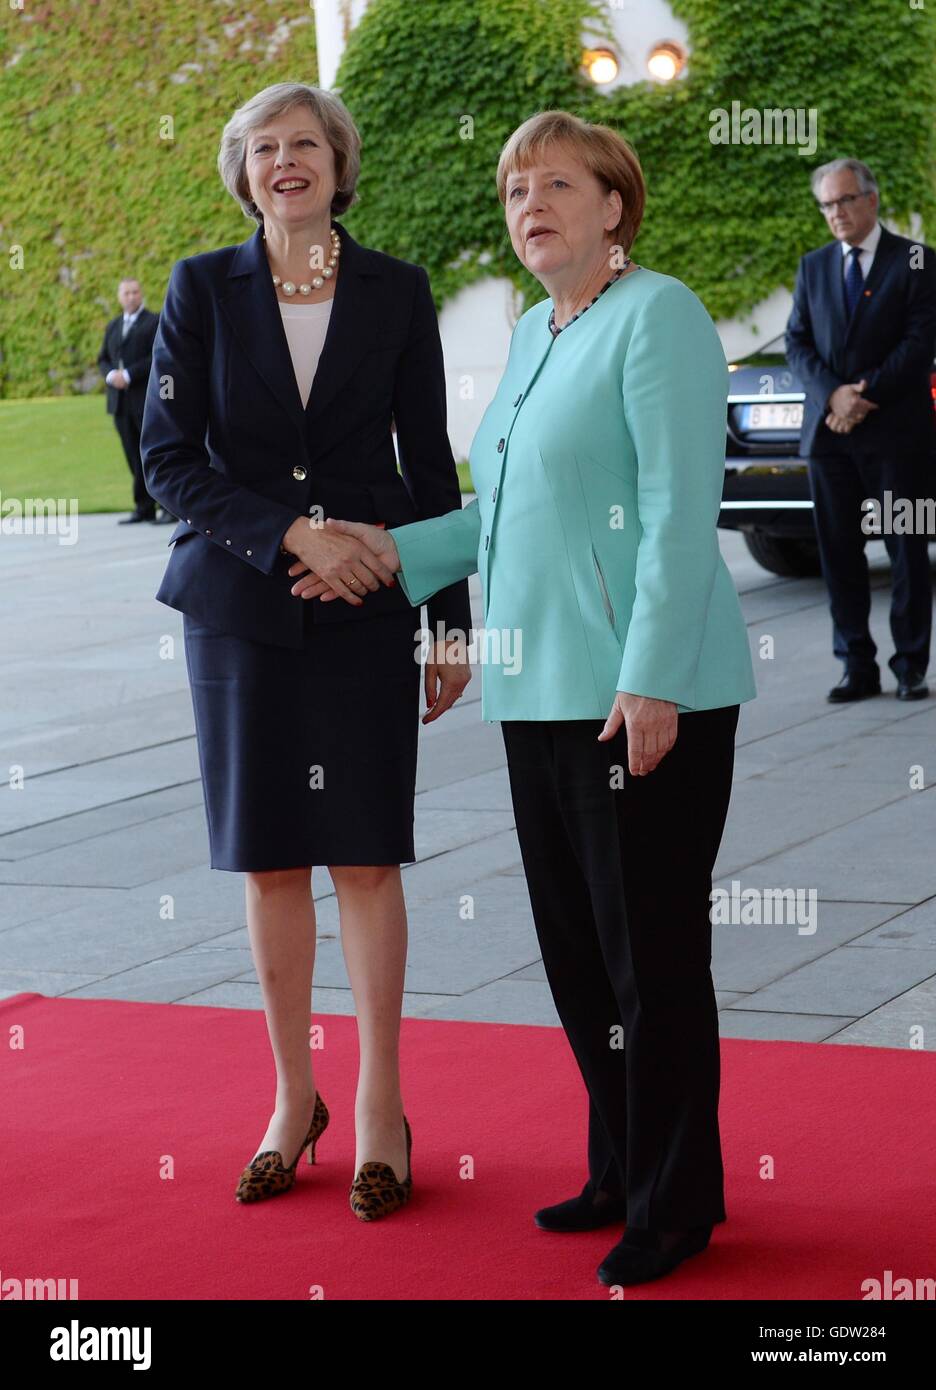 Prime Minister Theresa May meets German Chancellor Angela Merkel at the Chancellery in Berlin for talks. Stock Photo